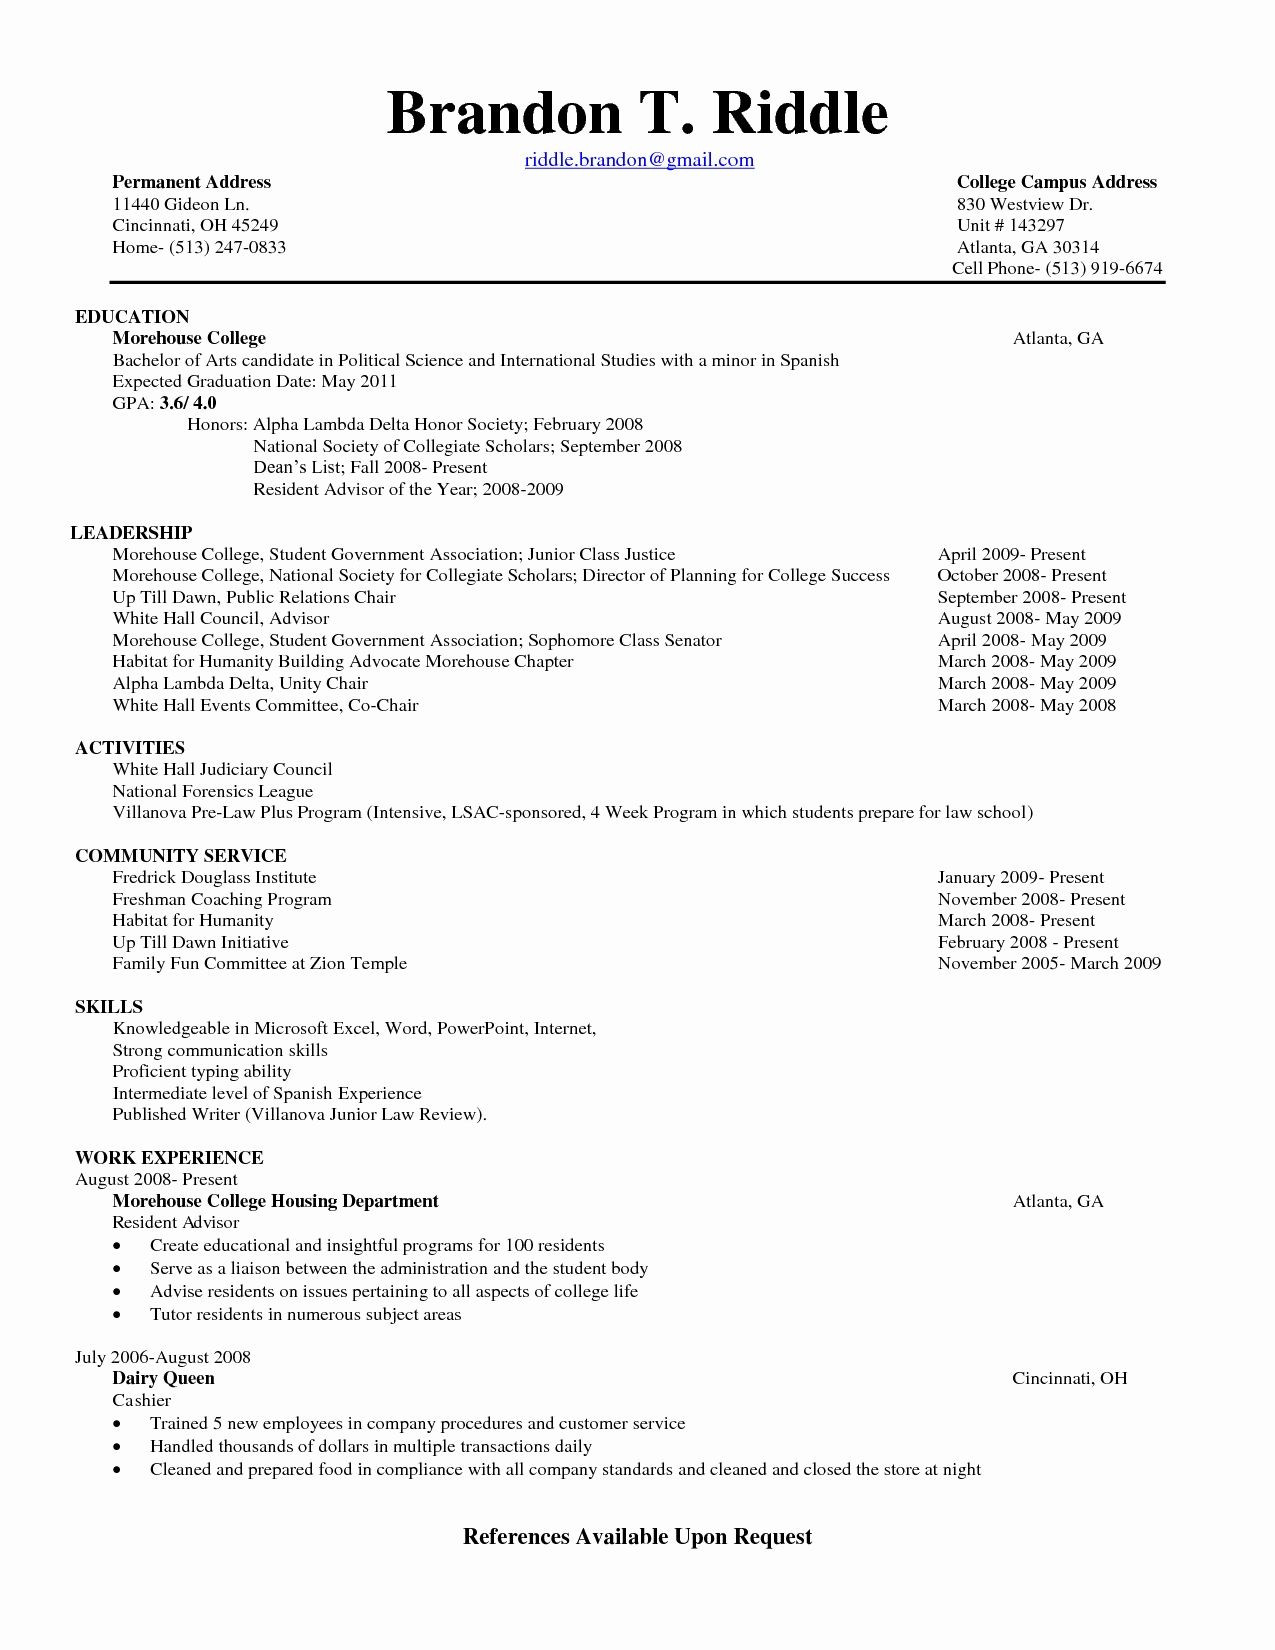 Resume Template for Freshman College Student Resume format Employers Prefer – Resume Templates Student Resume …